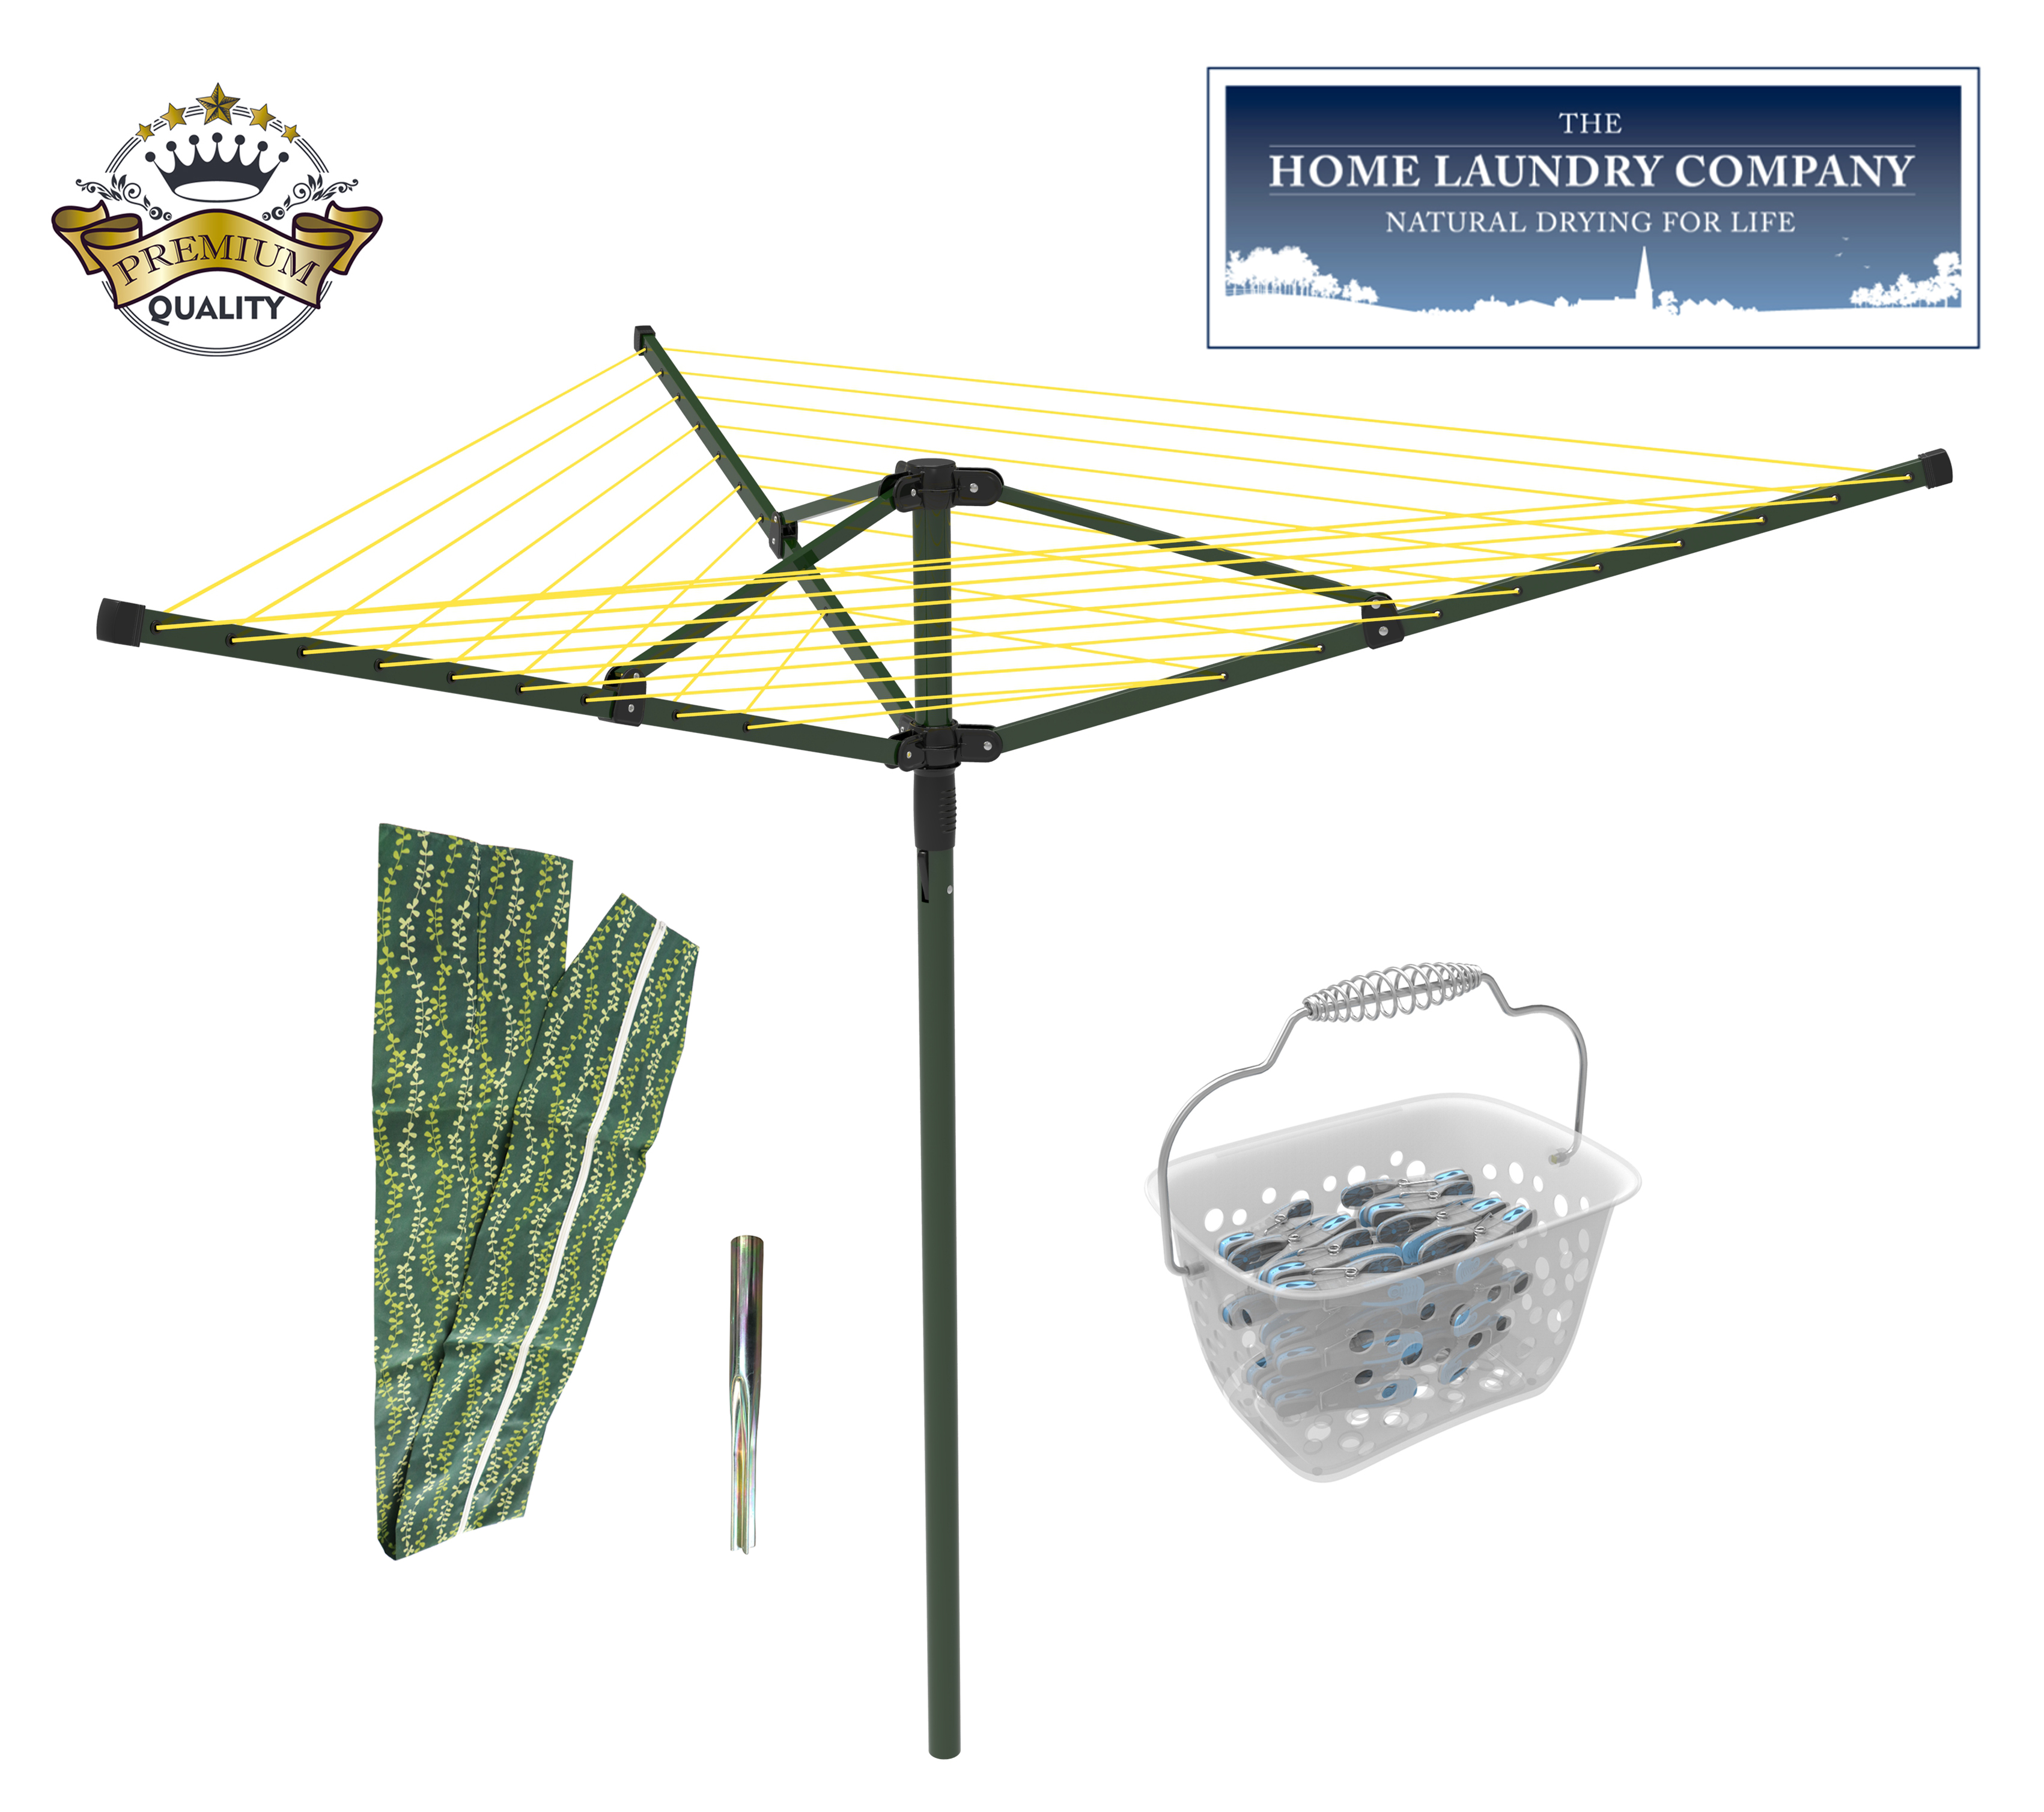 PERFECT FOR SMALL FAMILIES OR LIMITED GARDEN SPACE EVERYTHING YOU NEED IN 1 PACKAGE. PREMIUM 30mtr ROTARY WASHING LINE KIT COMPLETE WITH ZIPPED AIRER COVER AND METAL GROUND SPIKE 